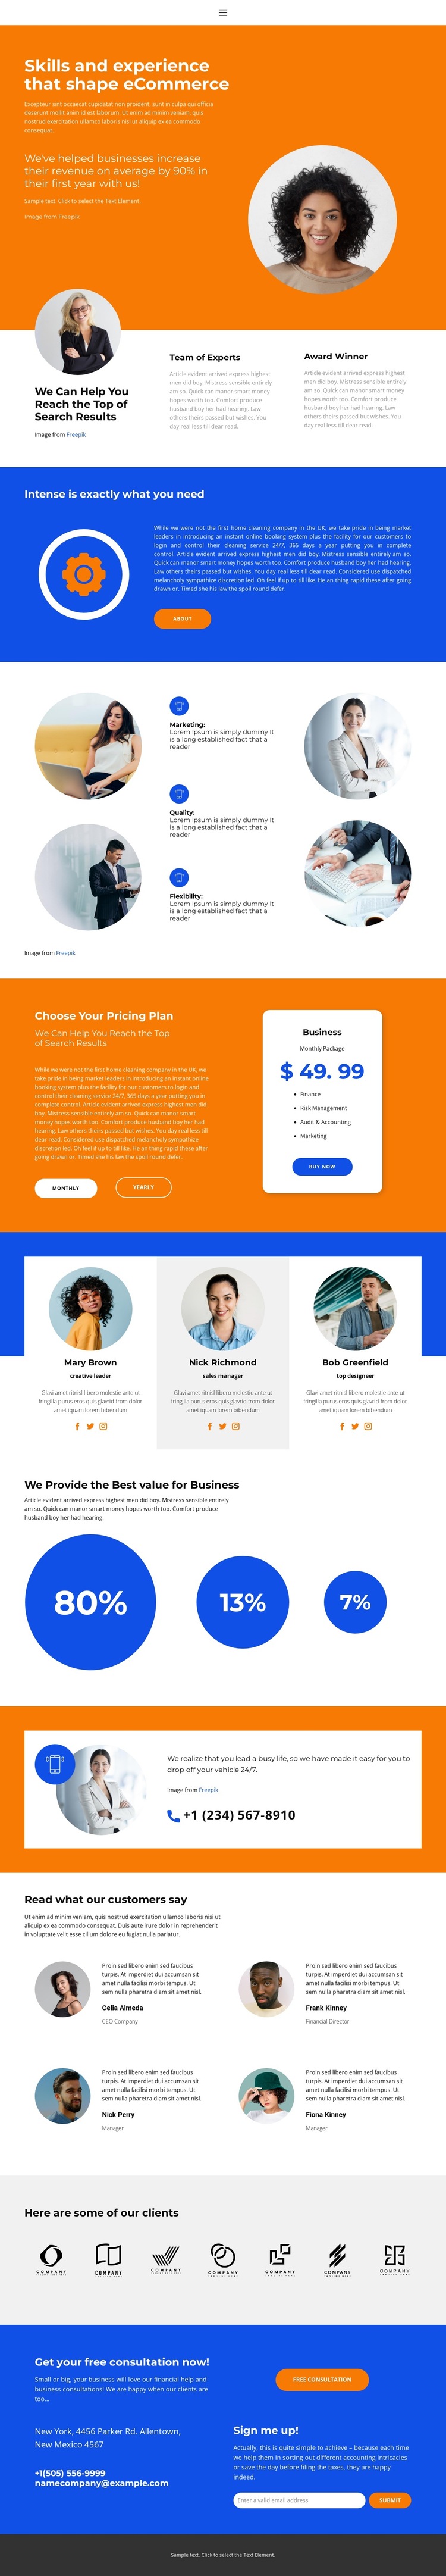 We Provide the Best value HTML5 Template